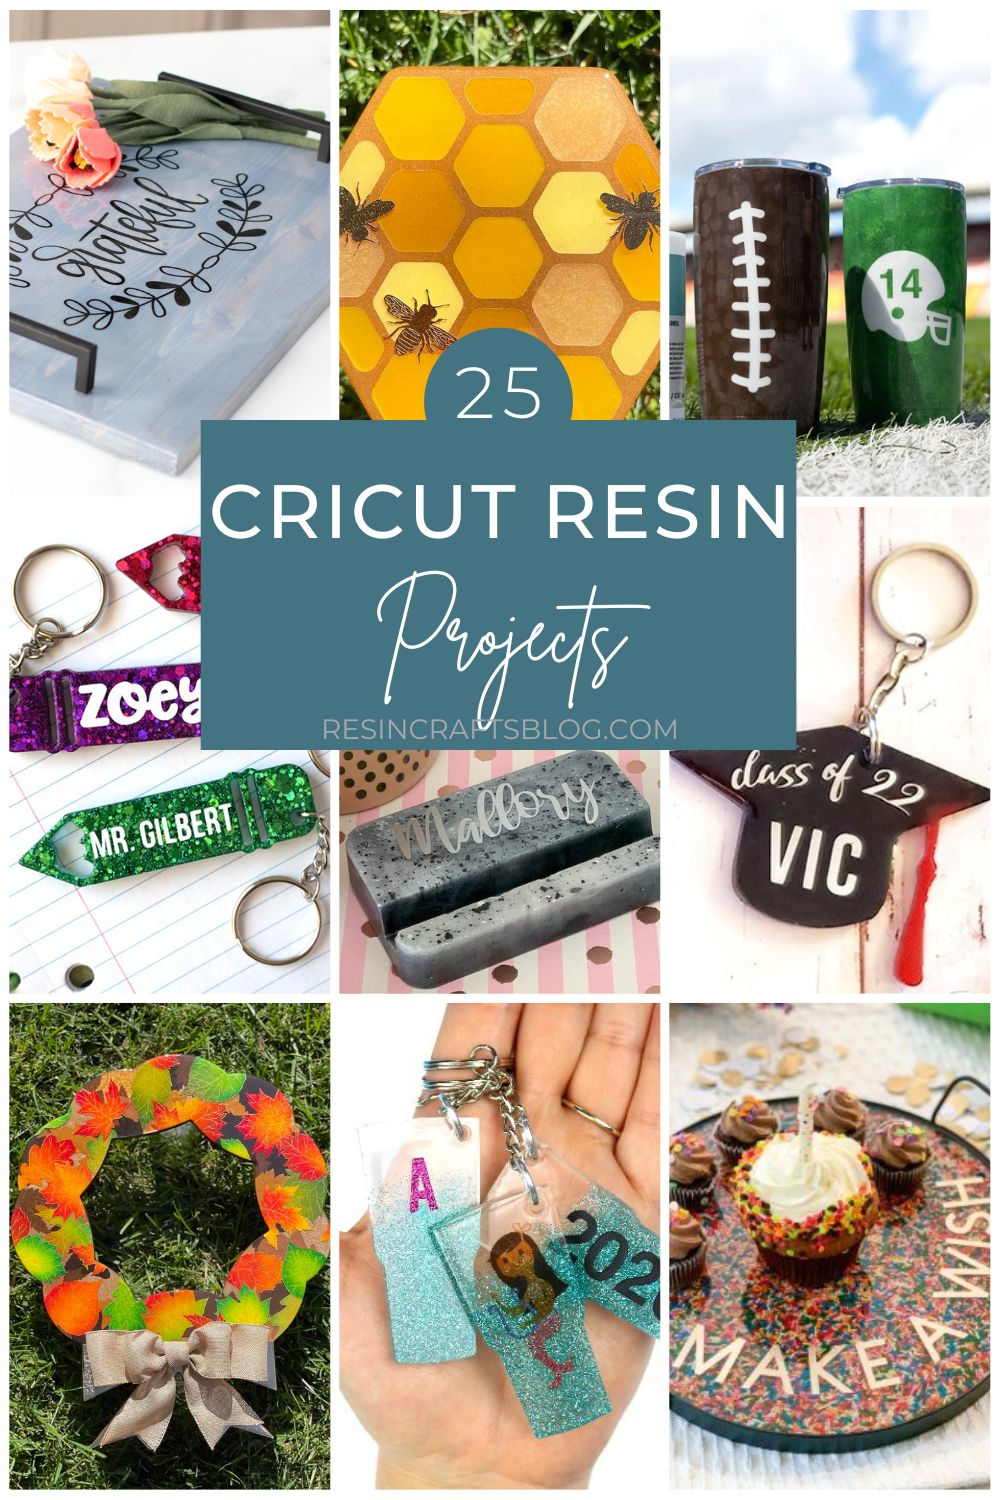 25 Easy Cricut and Resin Projects + HUGE Cricut Maker 3 and Epoxy Bundle Giveaway! via @resincraftsblog